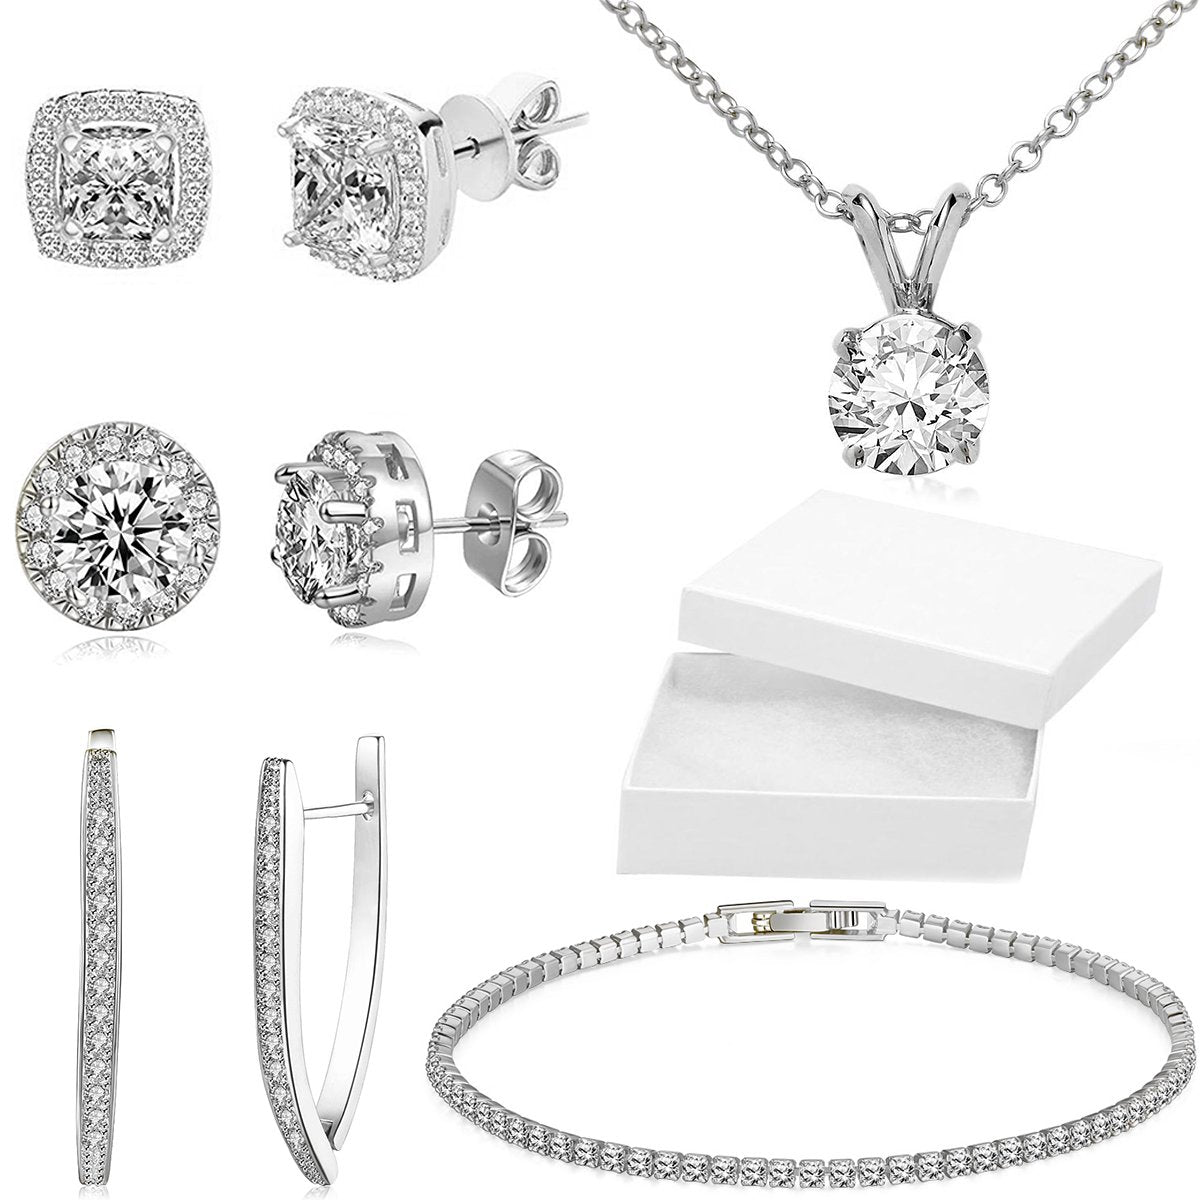 10Ct Tennis Bracelet + Halo Earring+ Necklace With  Crystals - 5 Piece Set with Luxe Box - 18K White Gold ITALY Design